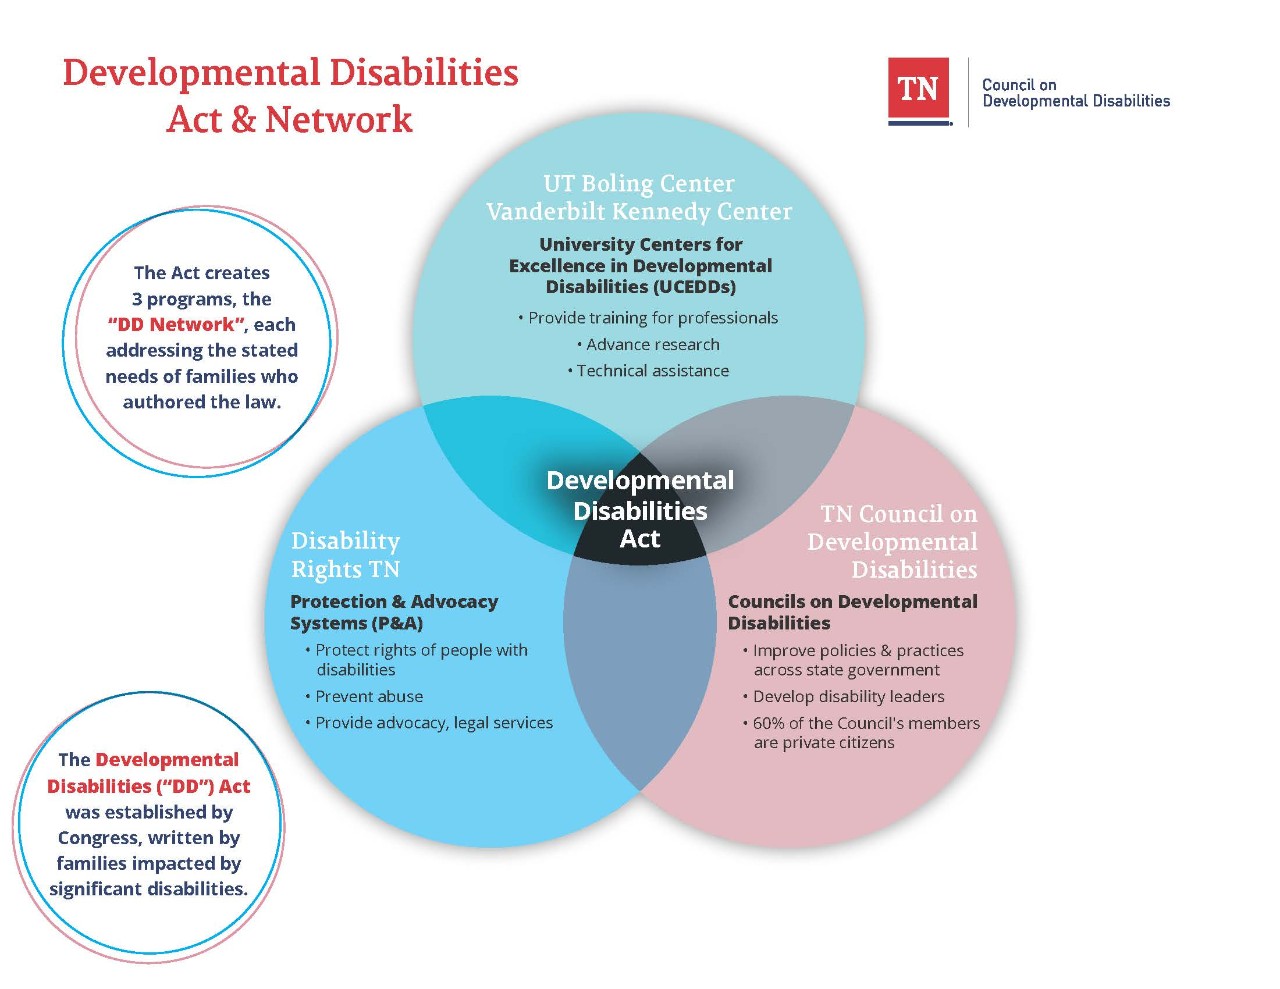 The graphic shows three concentric circles. Each circle has a brief description of an agency in the Tennessee Developmental Disabilities Network. The Boling Center for Excellence in Developmental Disabilities provides training for professionals, advances research and provides technical assistance. Disability Rights TN protects the rights of individuals with disabilities, prevents abuse, and provides advocacy and legal services. There are also two descriptors about the Developmental Disabilities Act. The Act was established by Congress and written by families impacted by significant disabilities. The Act creates 3 programs, the DD Network, each addressing the stated needs of families who authored the law.